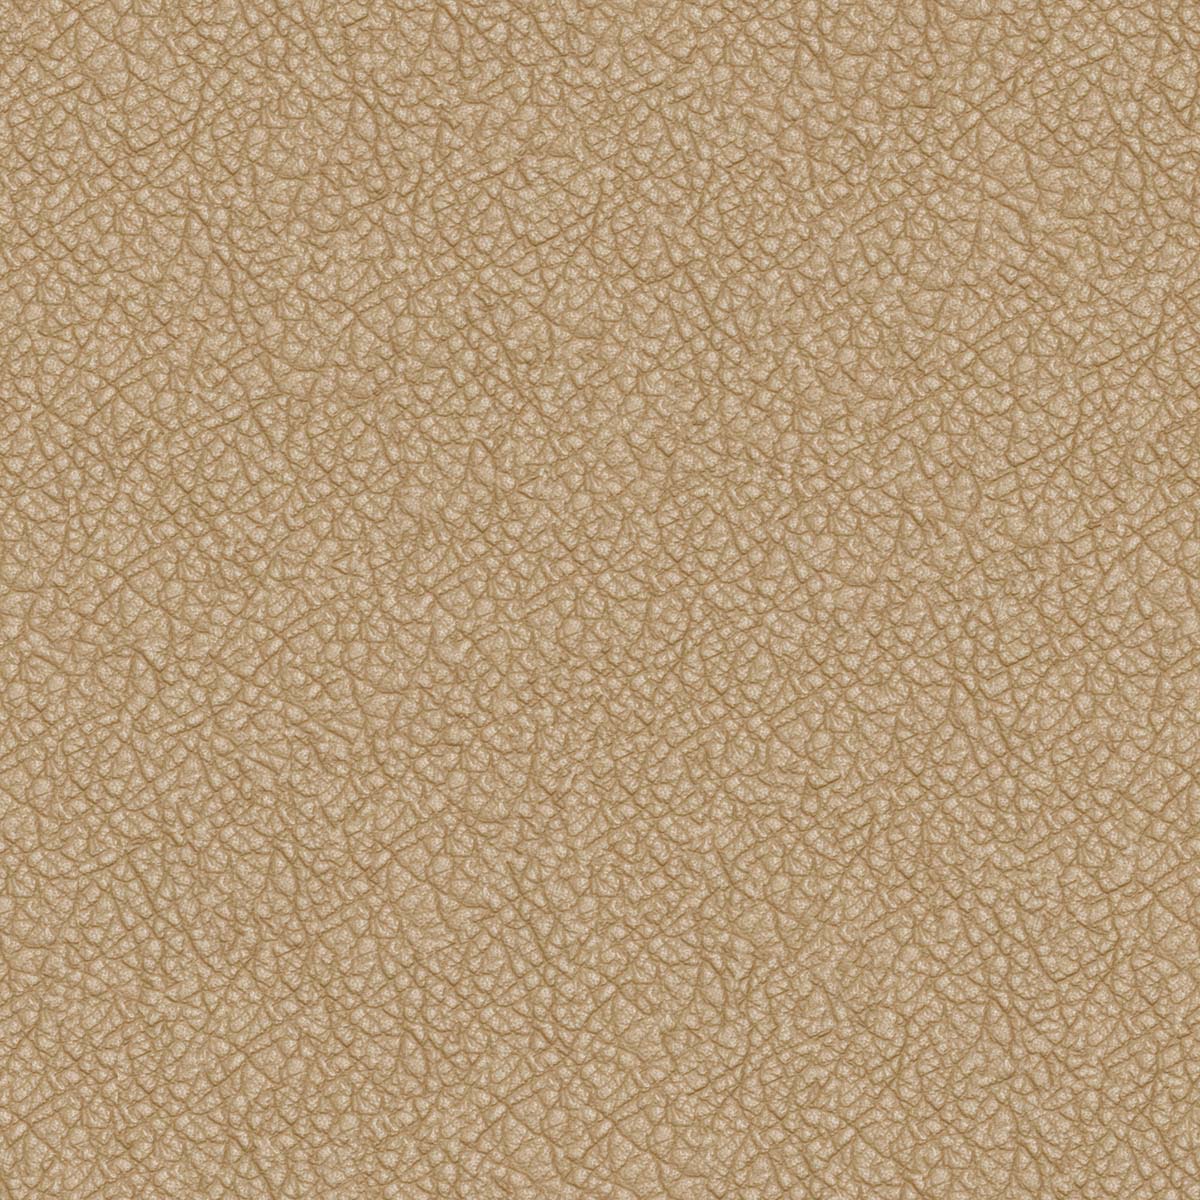 Leather Textured 3d Wallpaper for Wall